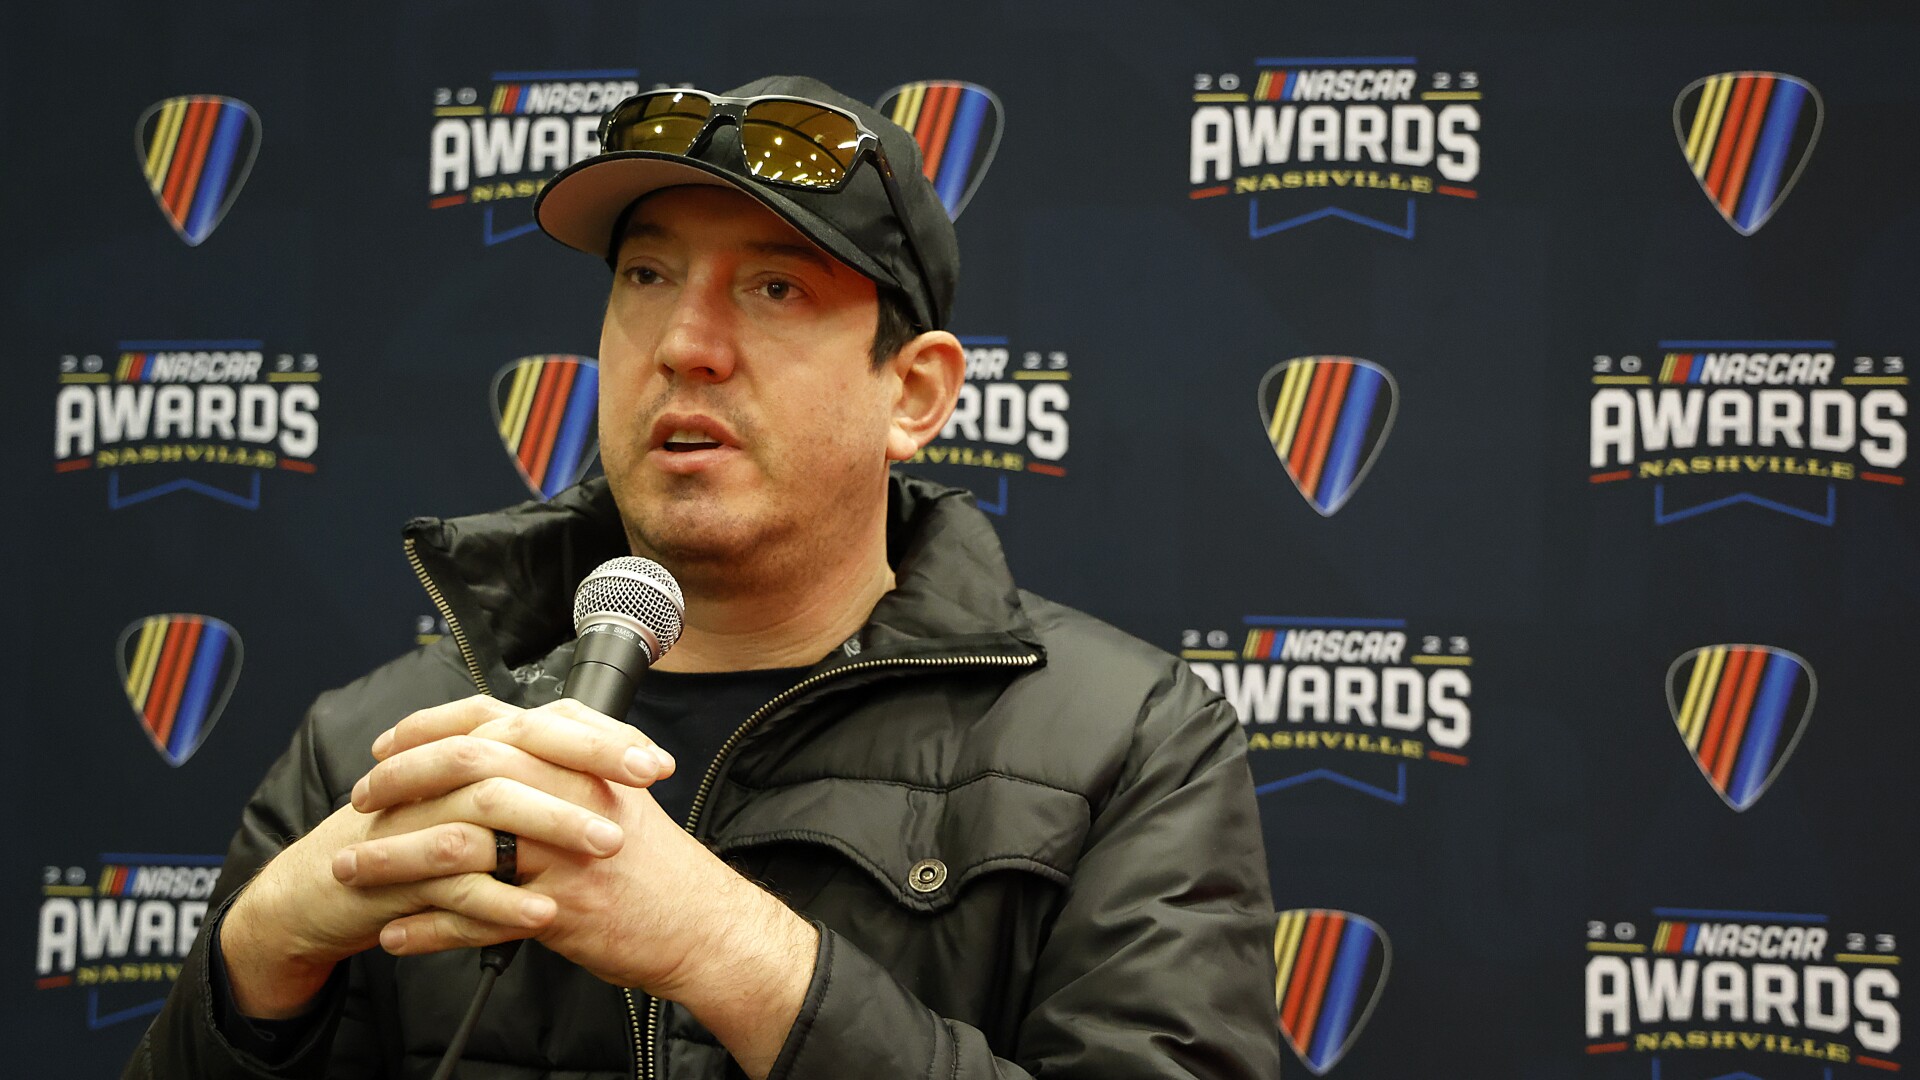 kyle busch aiming for consistency after 'b-minus' season